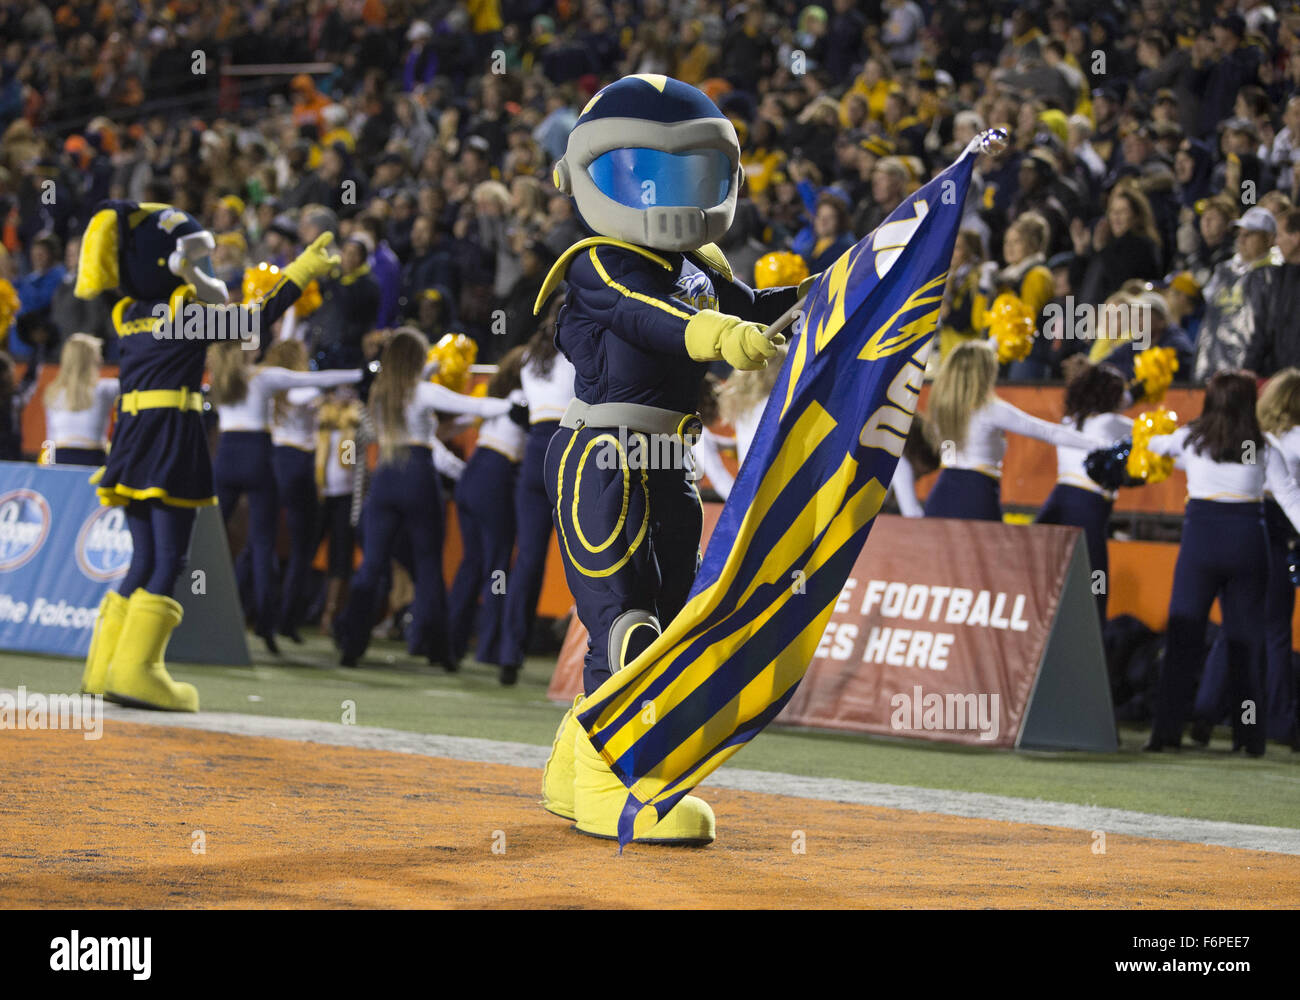 Bowling Green, Ohio, USA. 17th Nov, 2015. Toledo mascot celebrates during NCAA football game action between the Toledo Rockets and the Bowling Green Falcons at Doyt L. Perry Stadium in Bowling Green, Ohio. Toledo defeated Bowling Green 44-28. John Mersits/CSM/Alamy Live News Stock Photo